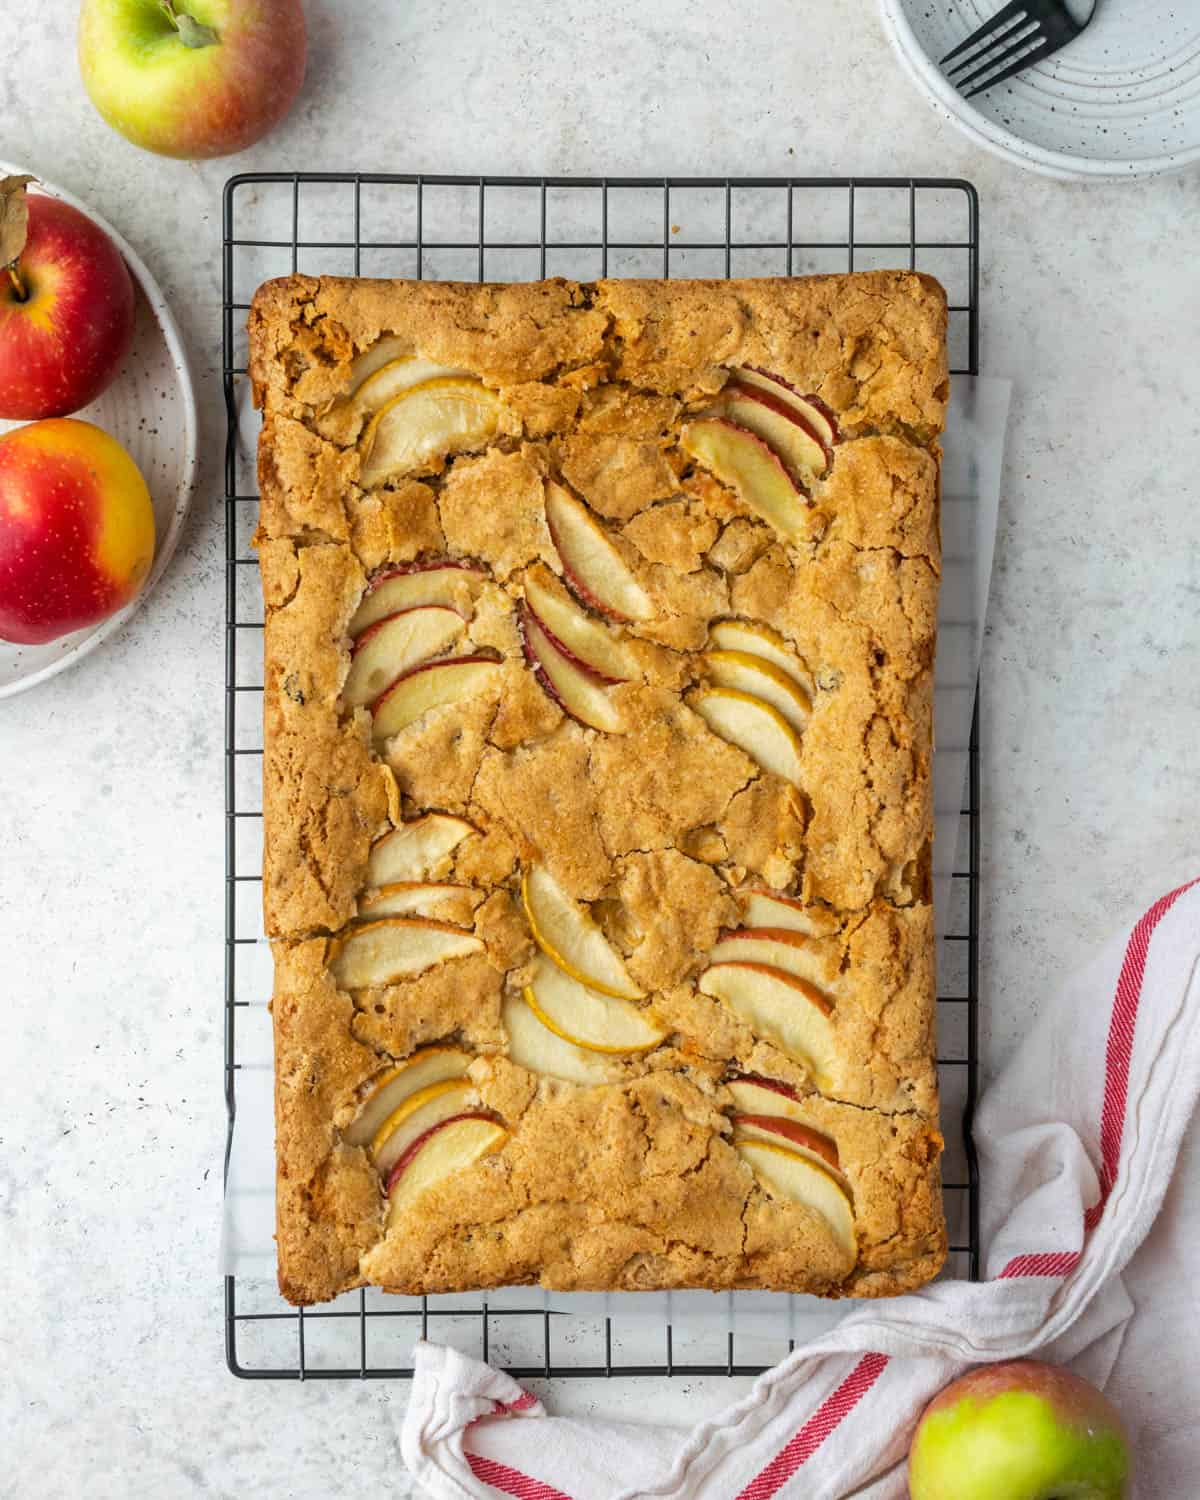 A gluten free apple cake topped with fresh apple slices cooling on a wire rack.